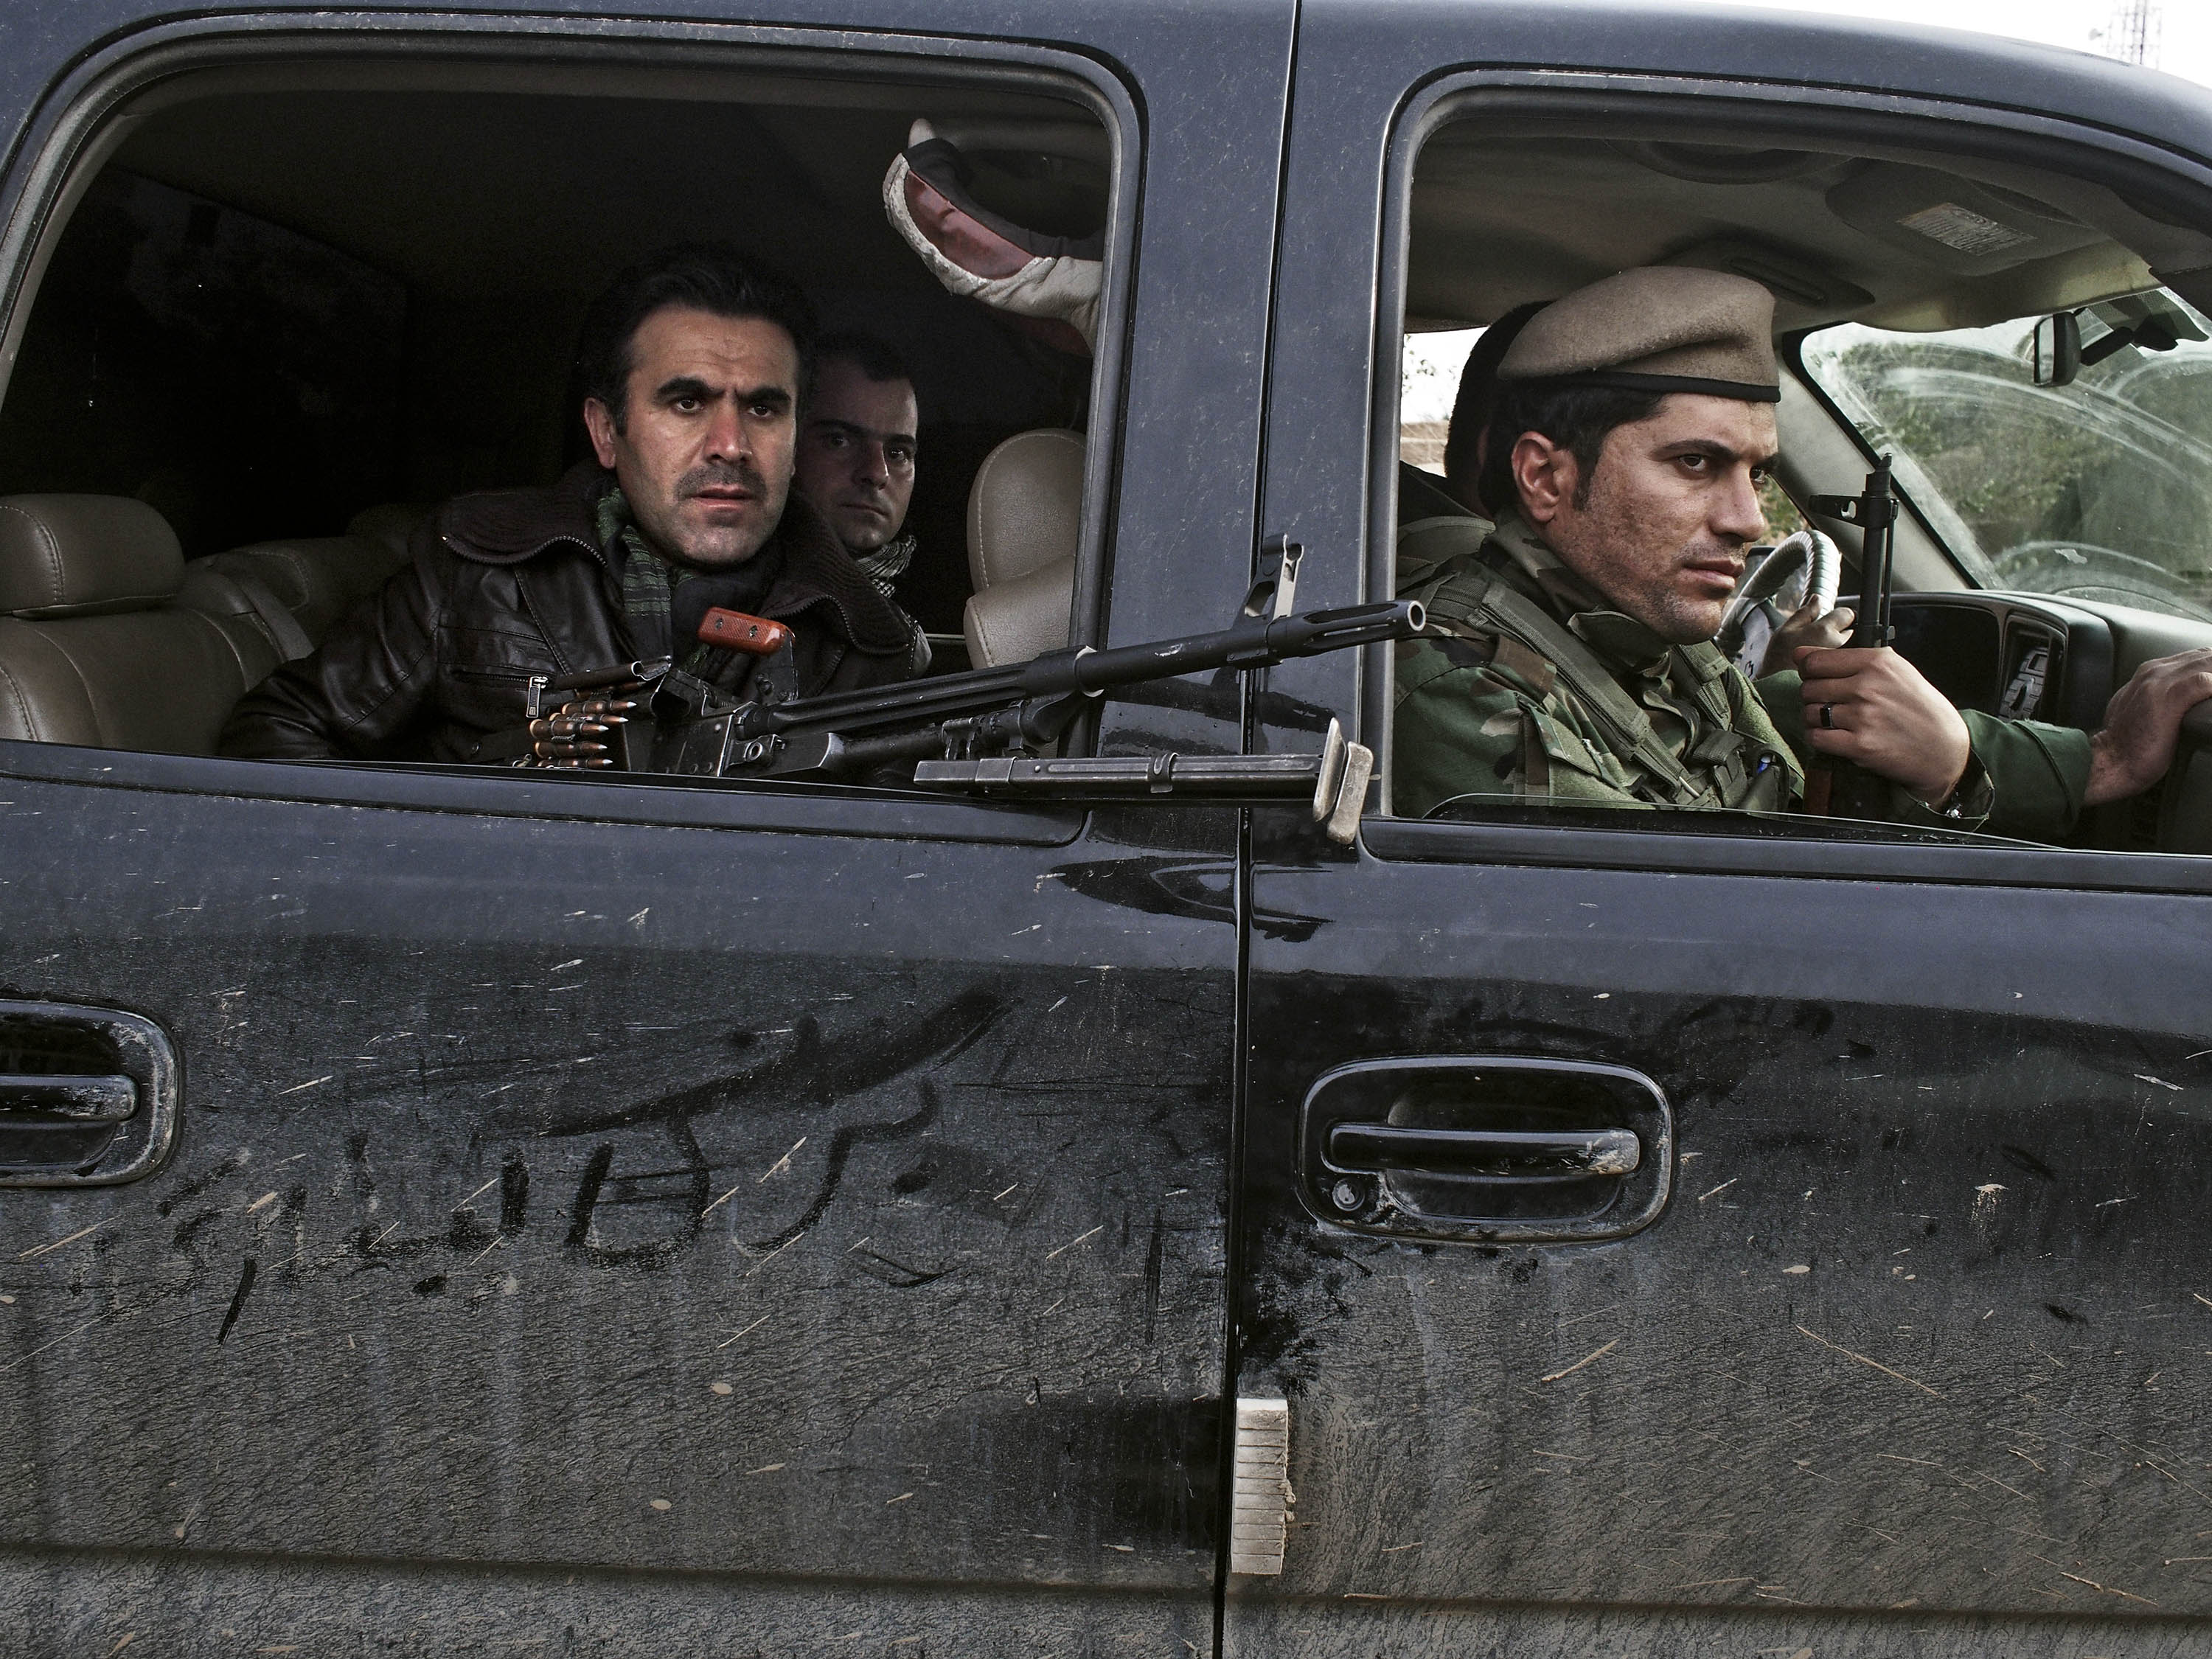 Counterattack: Kurdish soldiers drive through an Iraqi village in December after taking it back from ISIS forces (Moises Saman—Magnum)